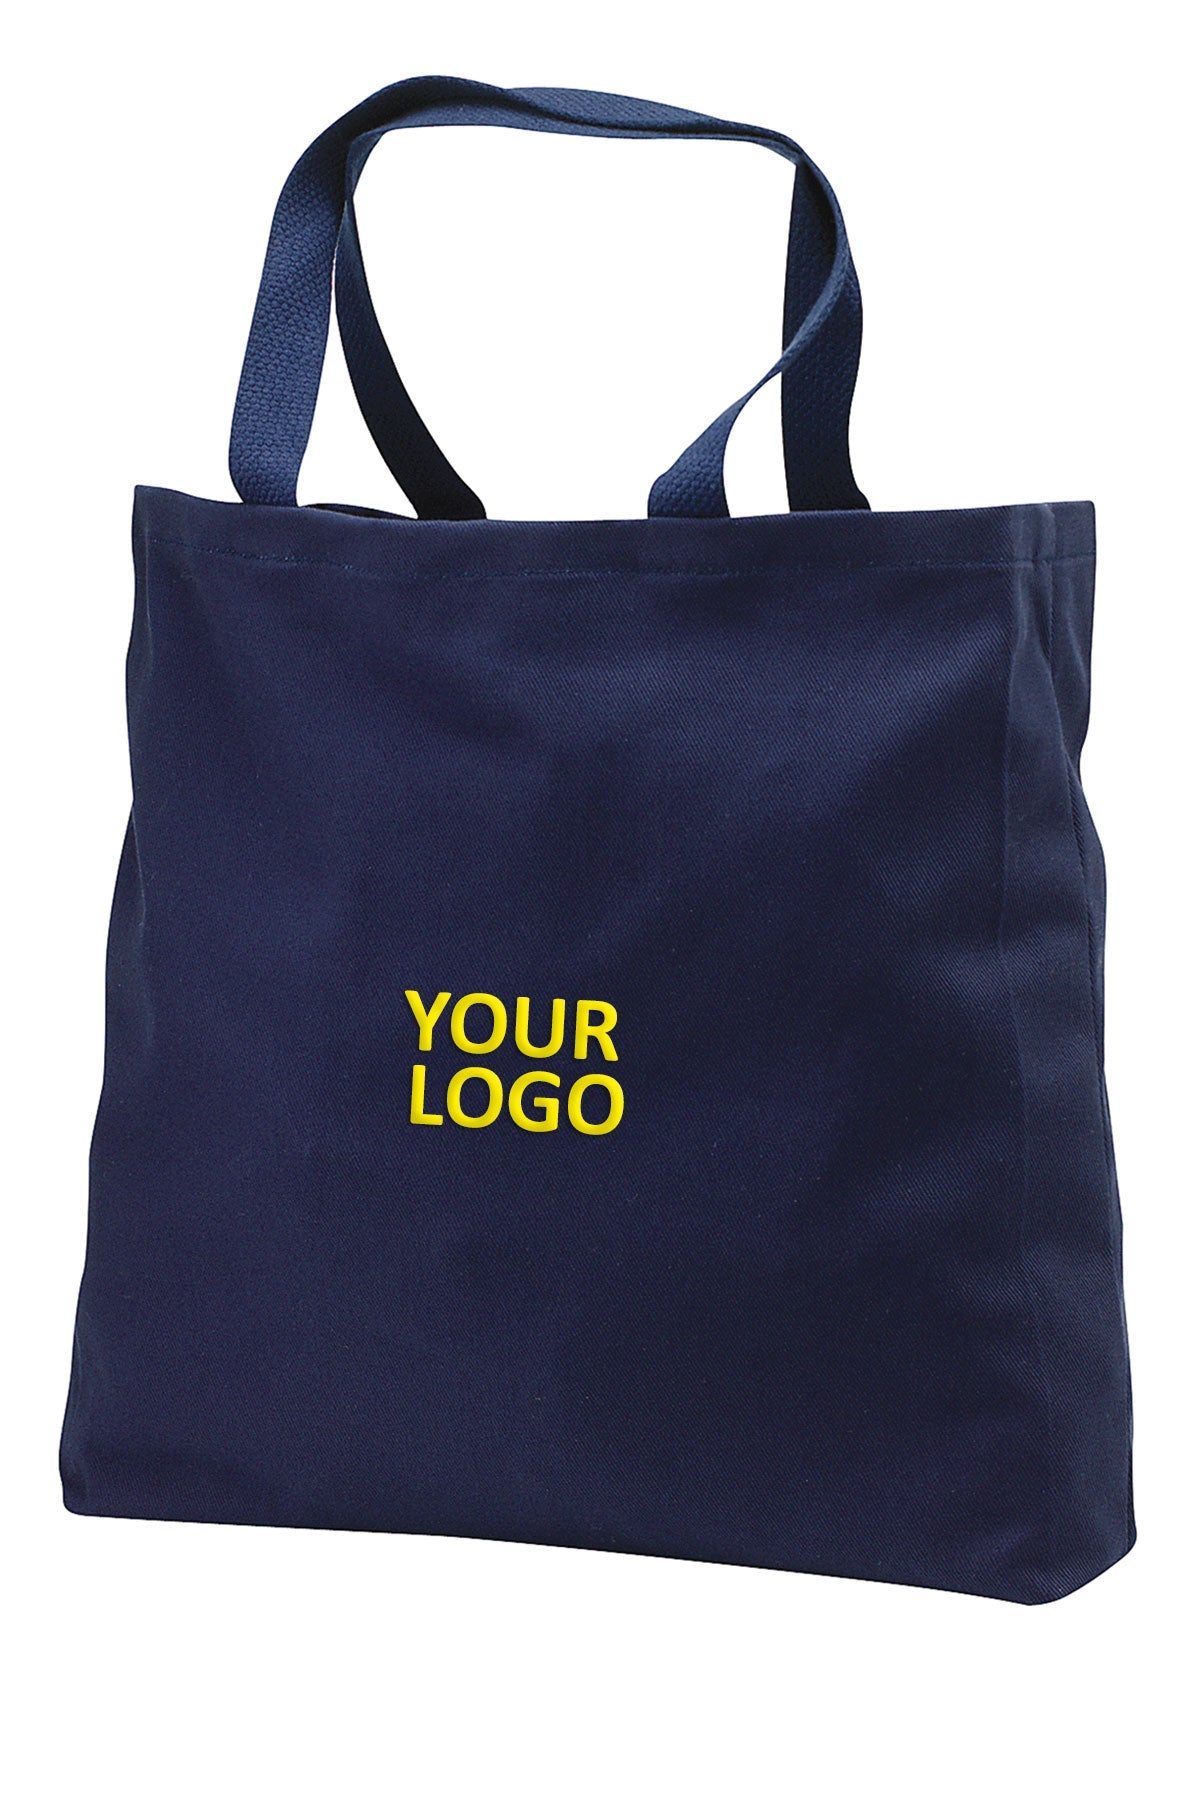 Port Authority - Convention Tote